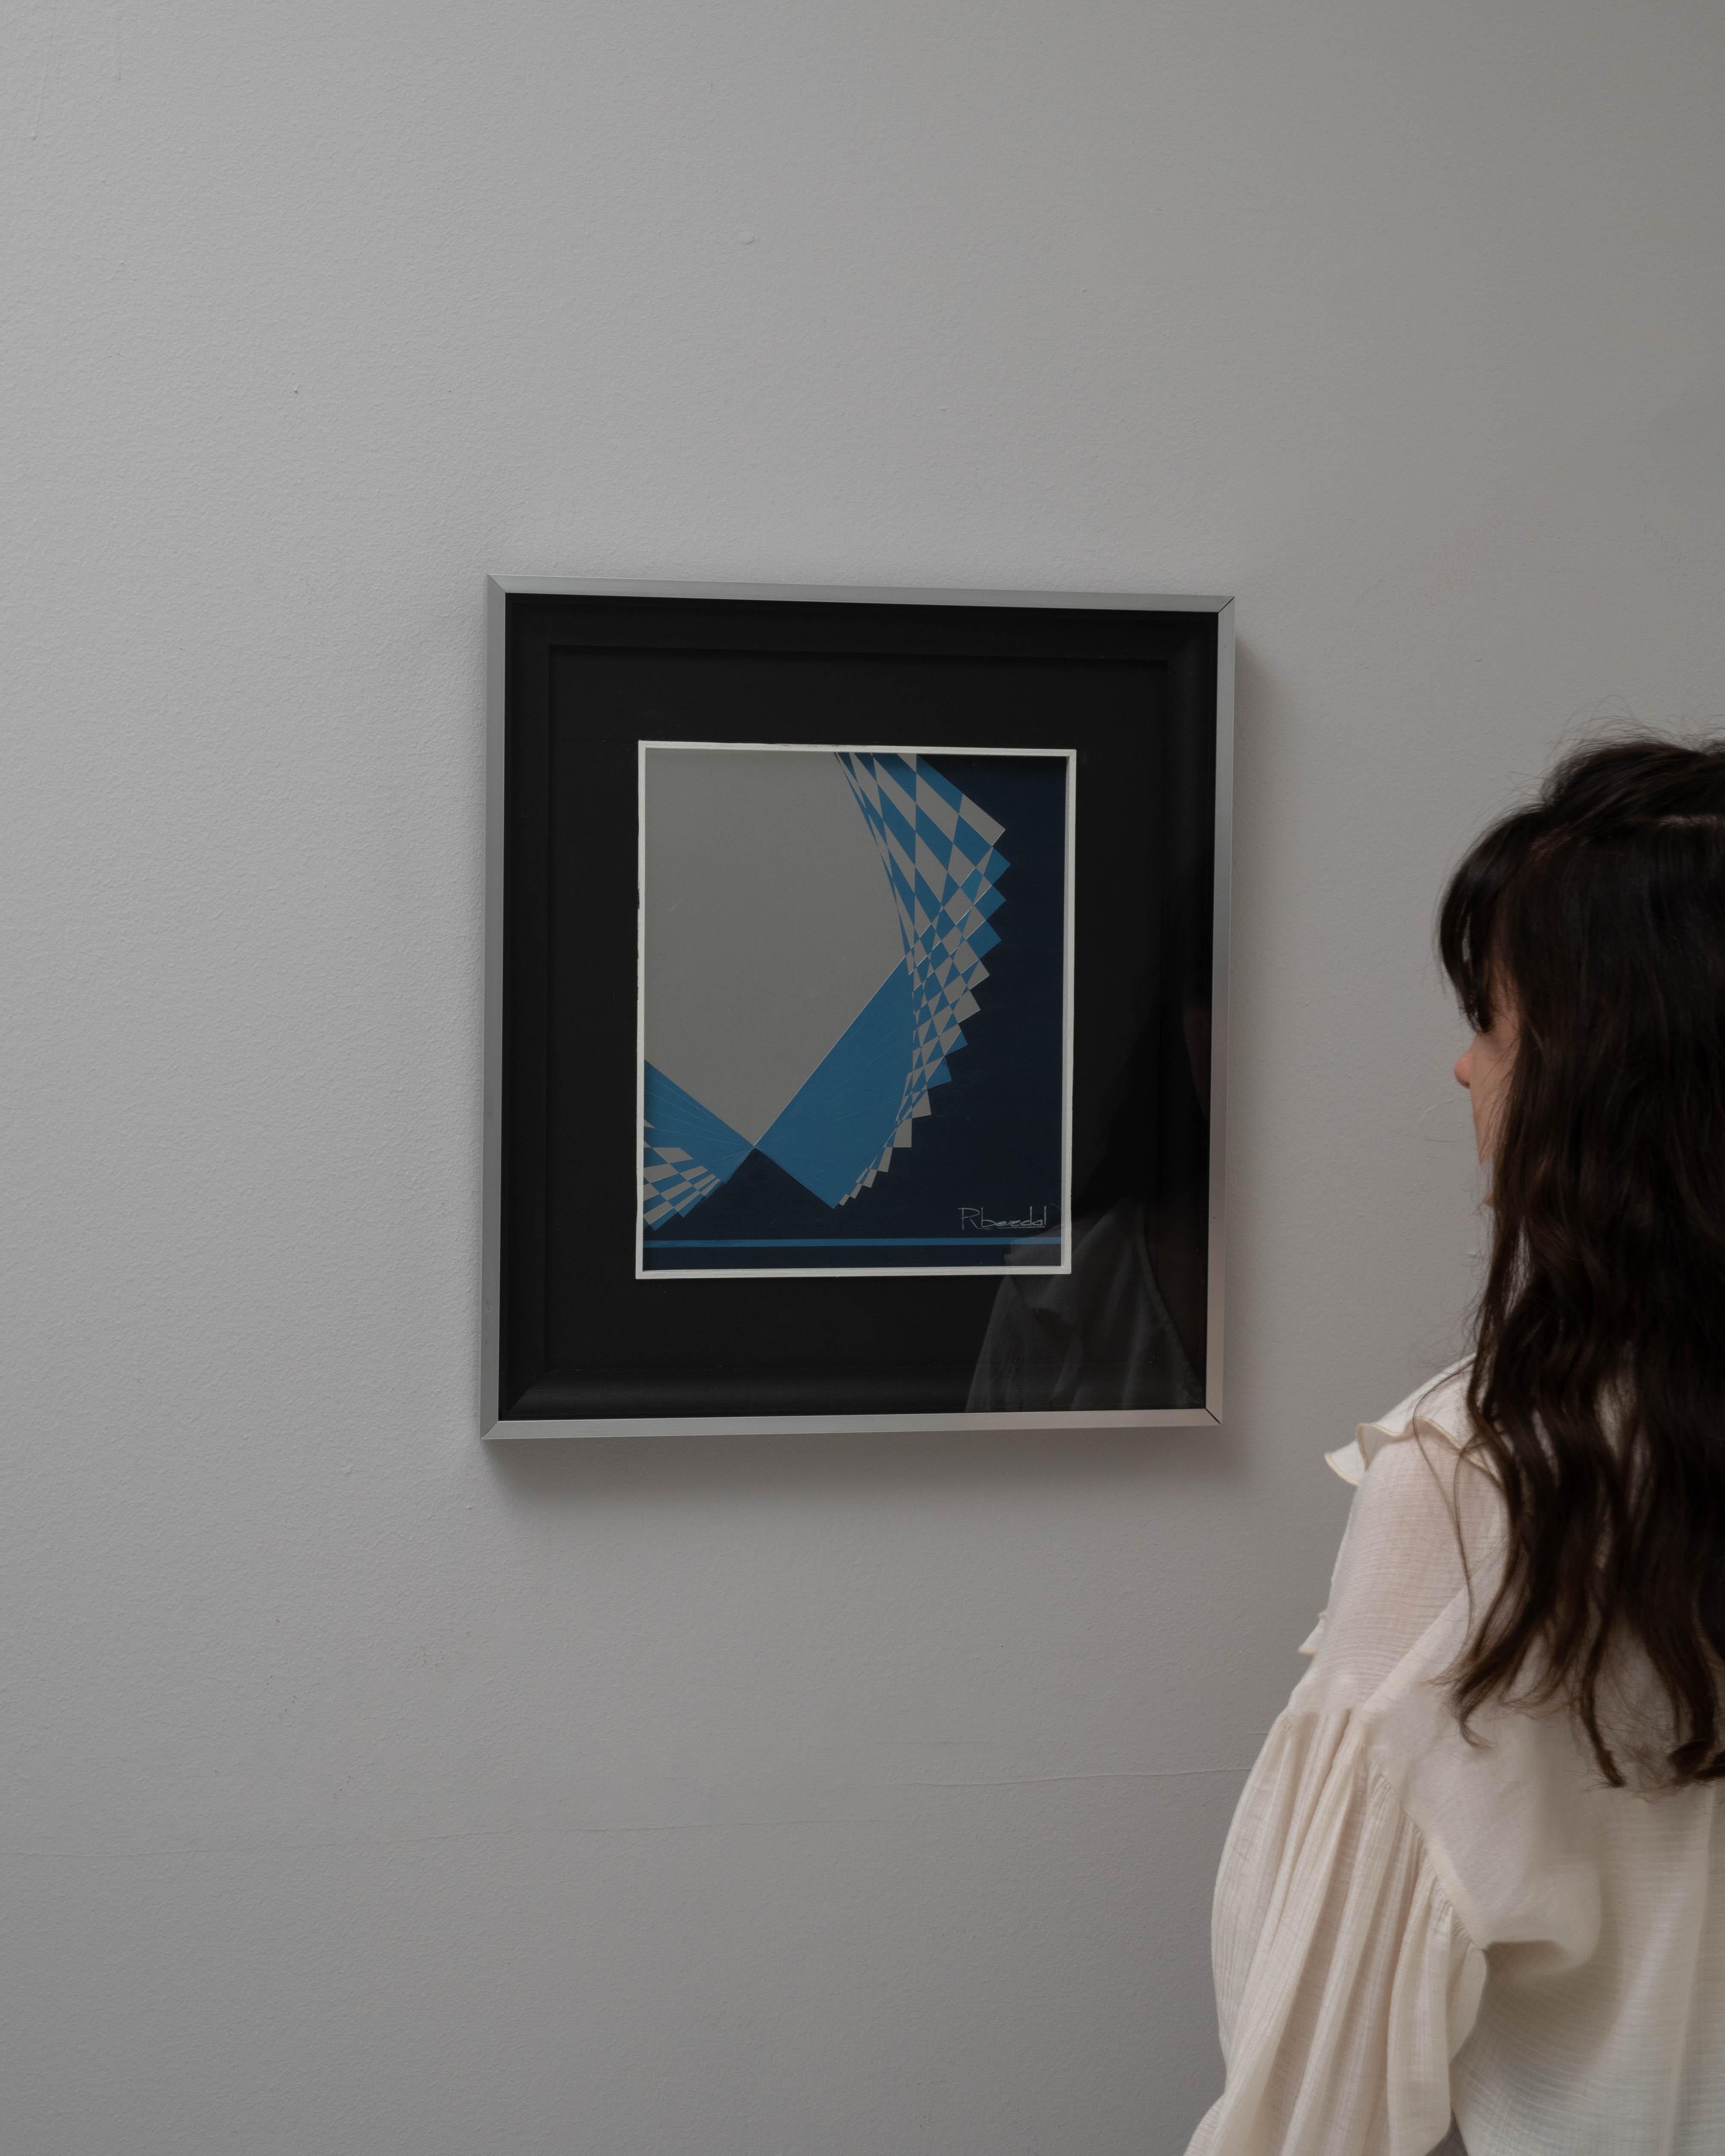 Infuse your living space with the minimalist elegance of this 20th Century Belgian painting by René Berdal. This artwork, set within a sophisticated black frame, features a bold geometric design dominated by shades of cool blue and contrasting